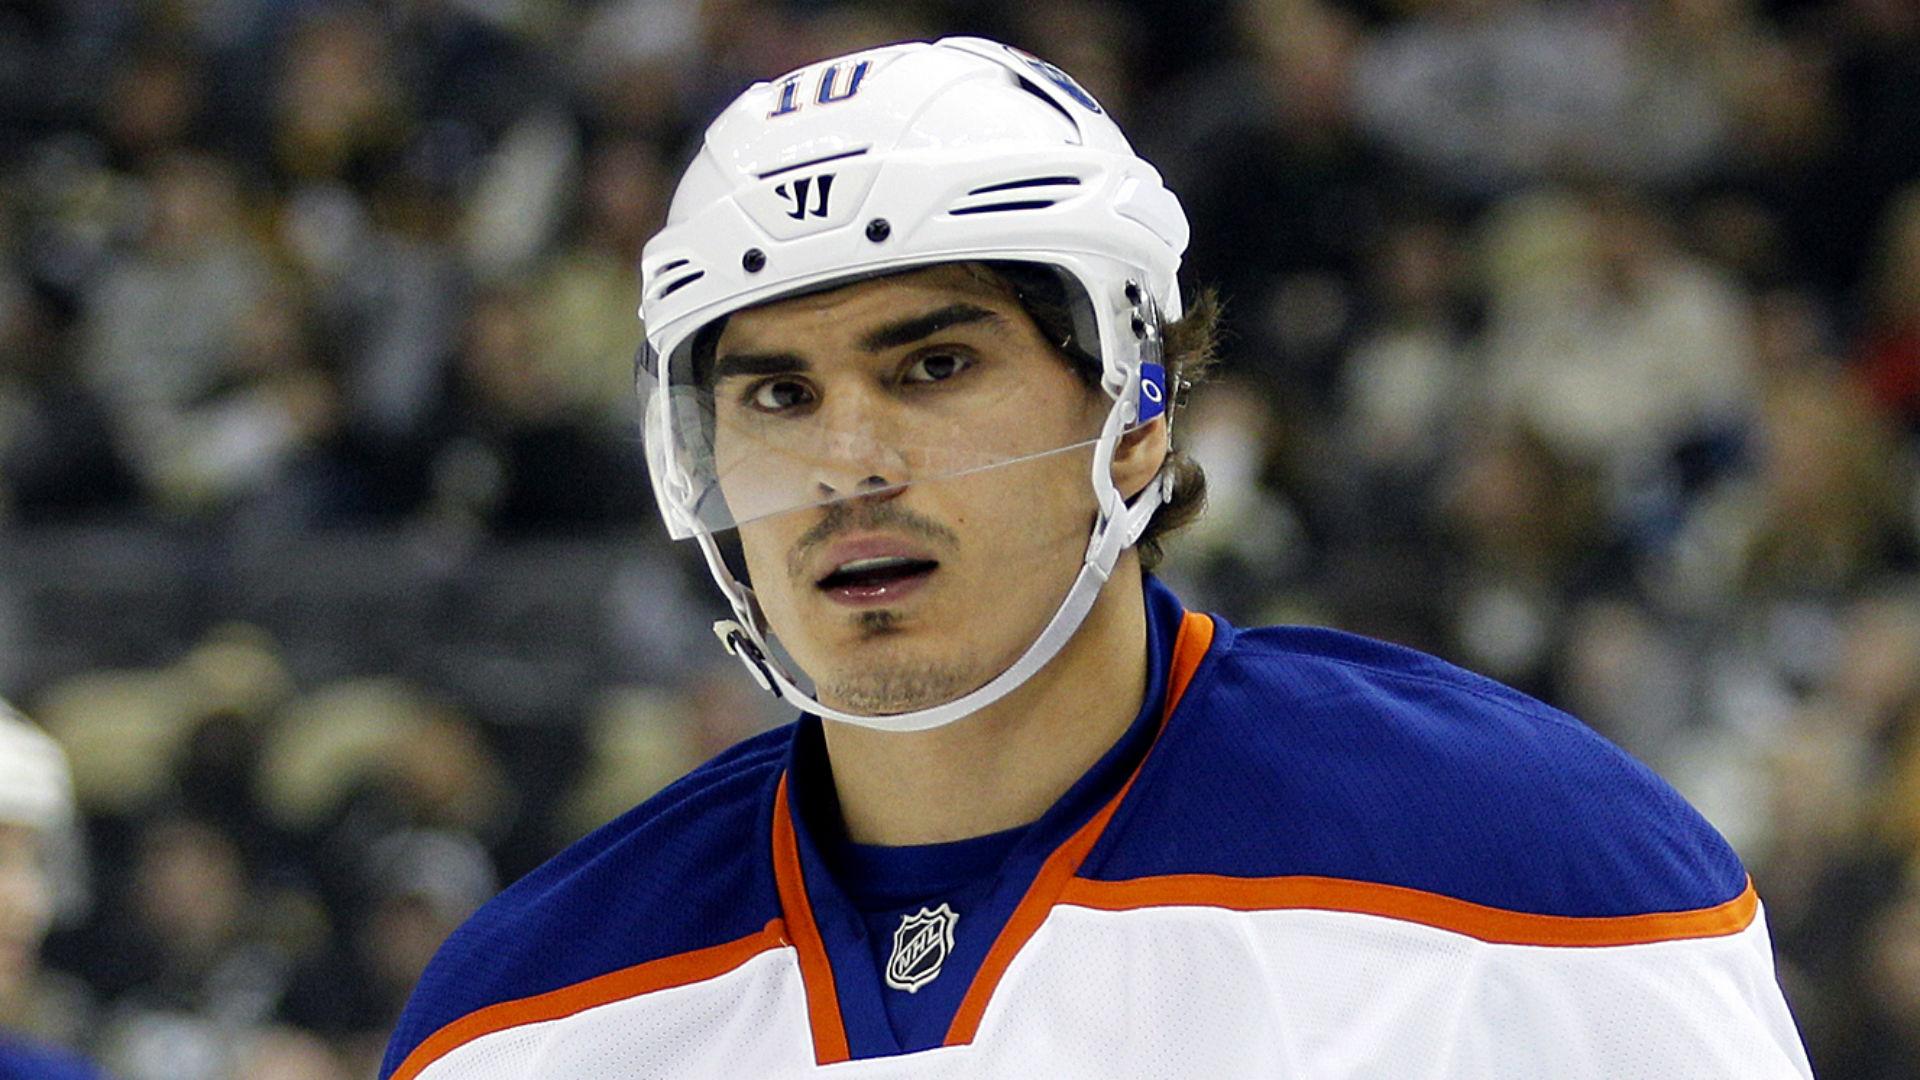 Nail Yakupov Backgrounds, Compatible - PC, Mobile, Gadgets| 1920x1080 px